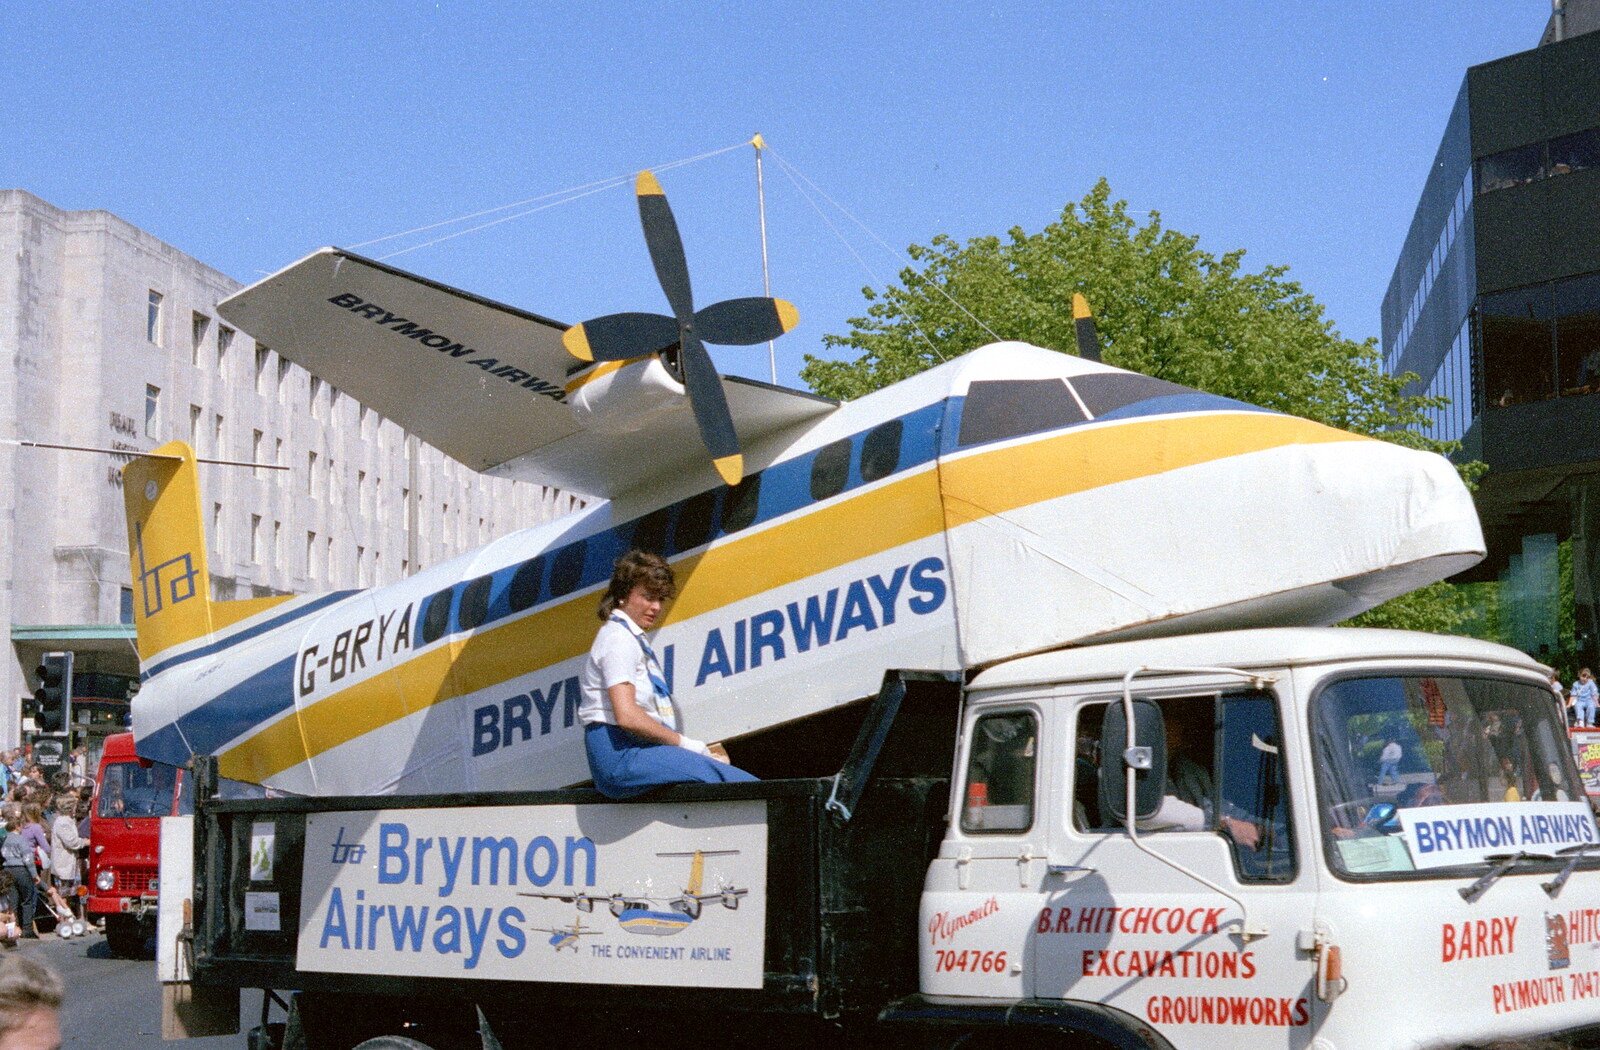 A Brymon Airways model aeroplane from Uni: The Lord Mayor's Procession, Plymouth, Devon - 21st May 1986